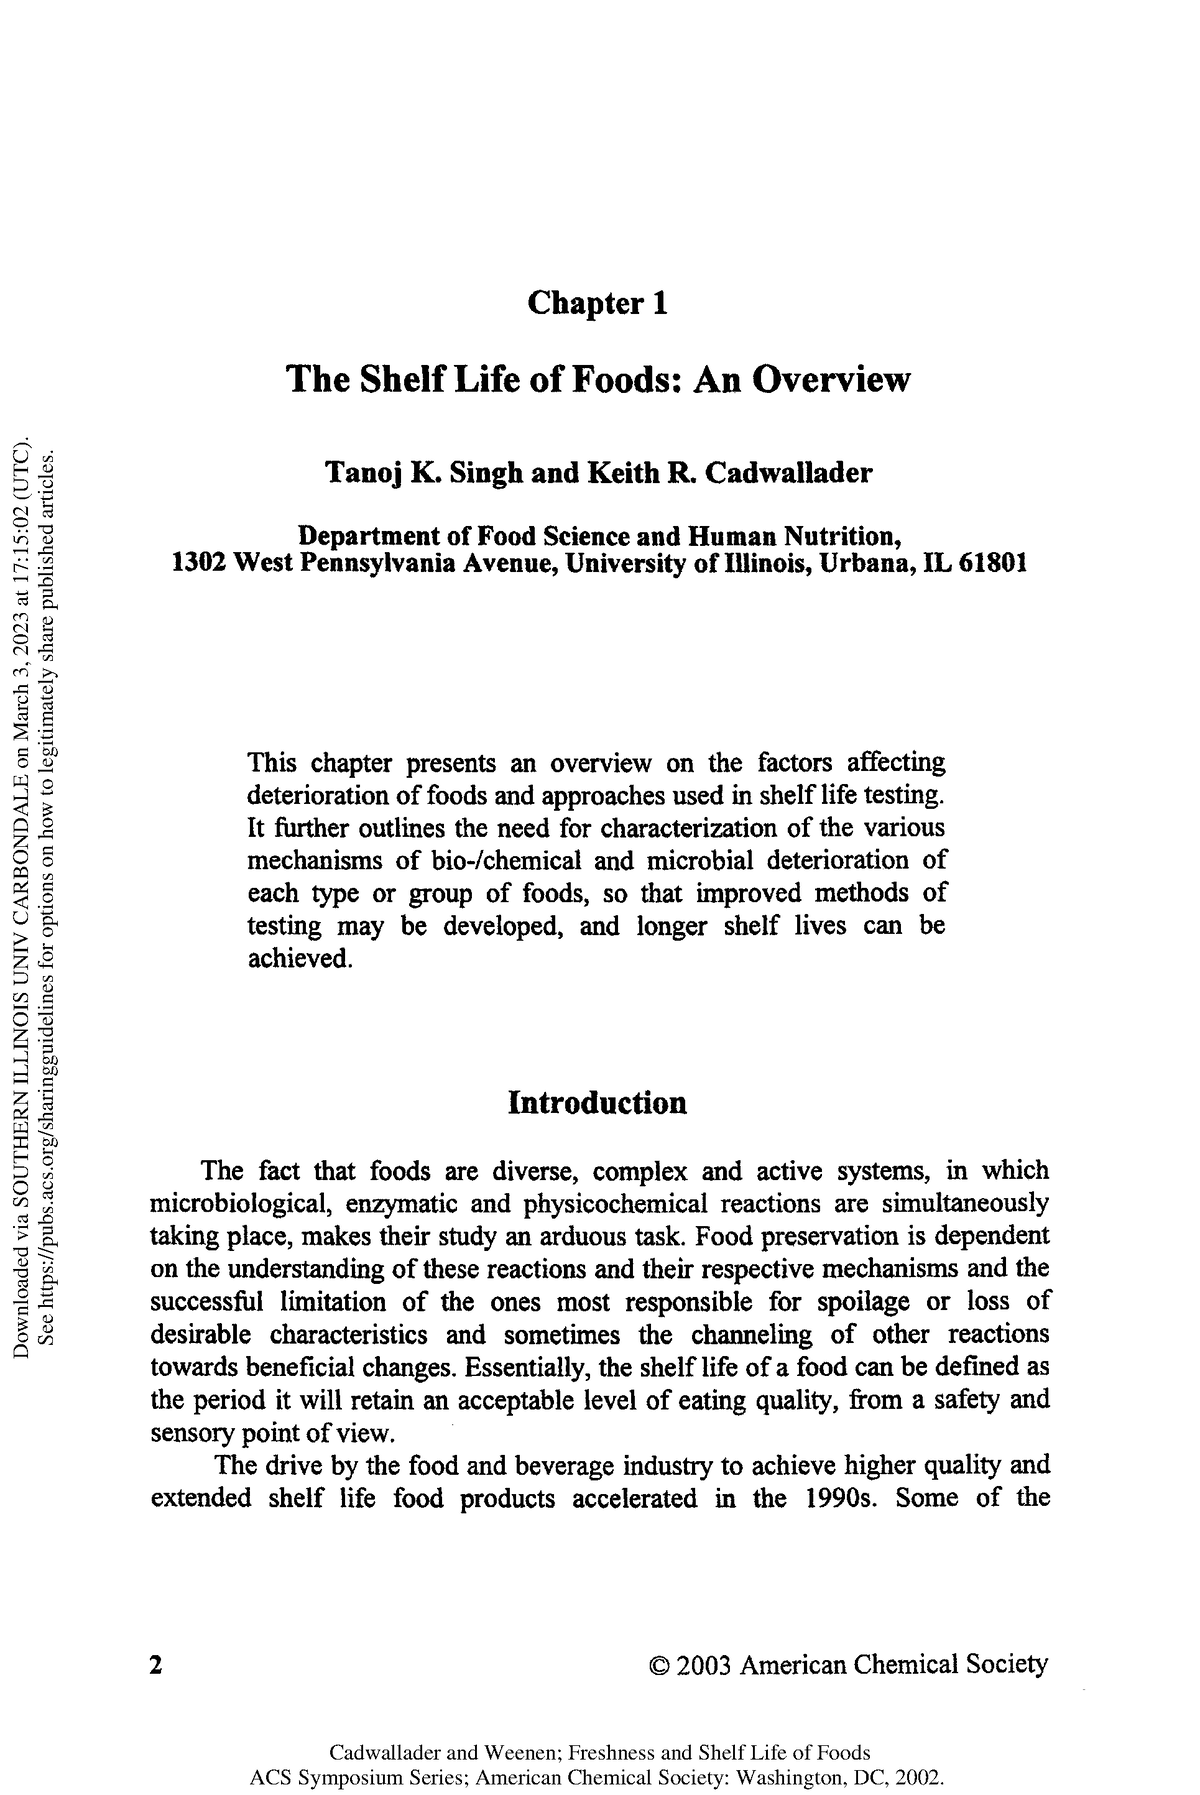 the-shelf-life-of-foods-an-overview-chapter-1-the-shelf-life-of-foods-an-overview-tanoj-k